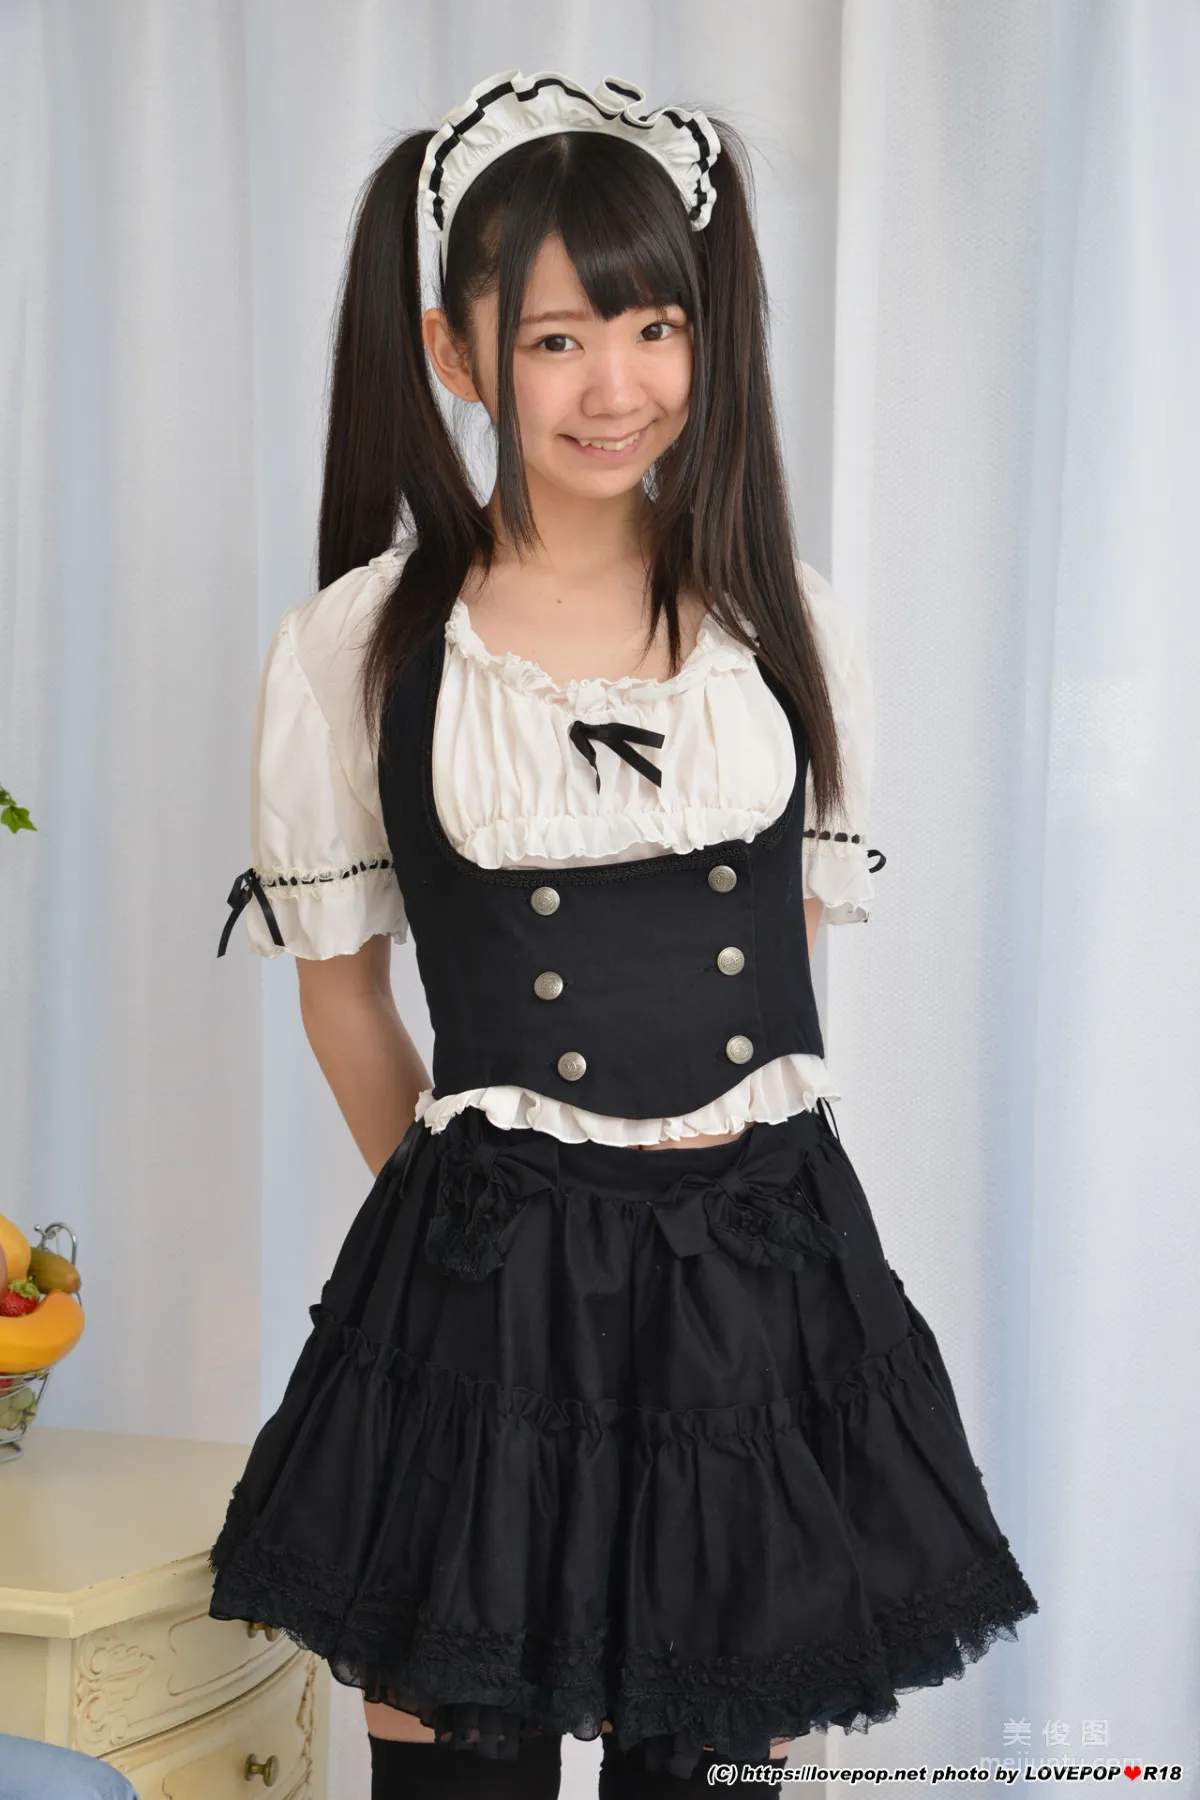 [LOVEPOP] Special Maid Collection - 白井ゆずか Photoset 022